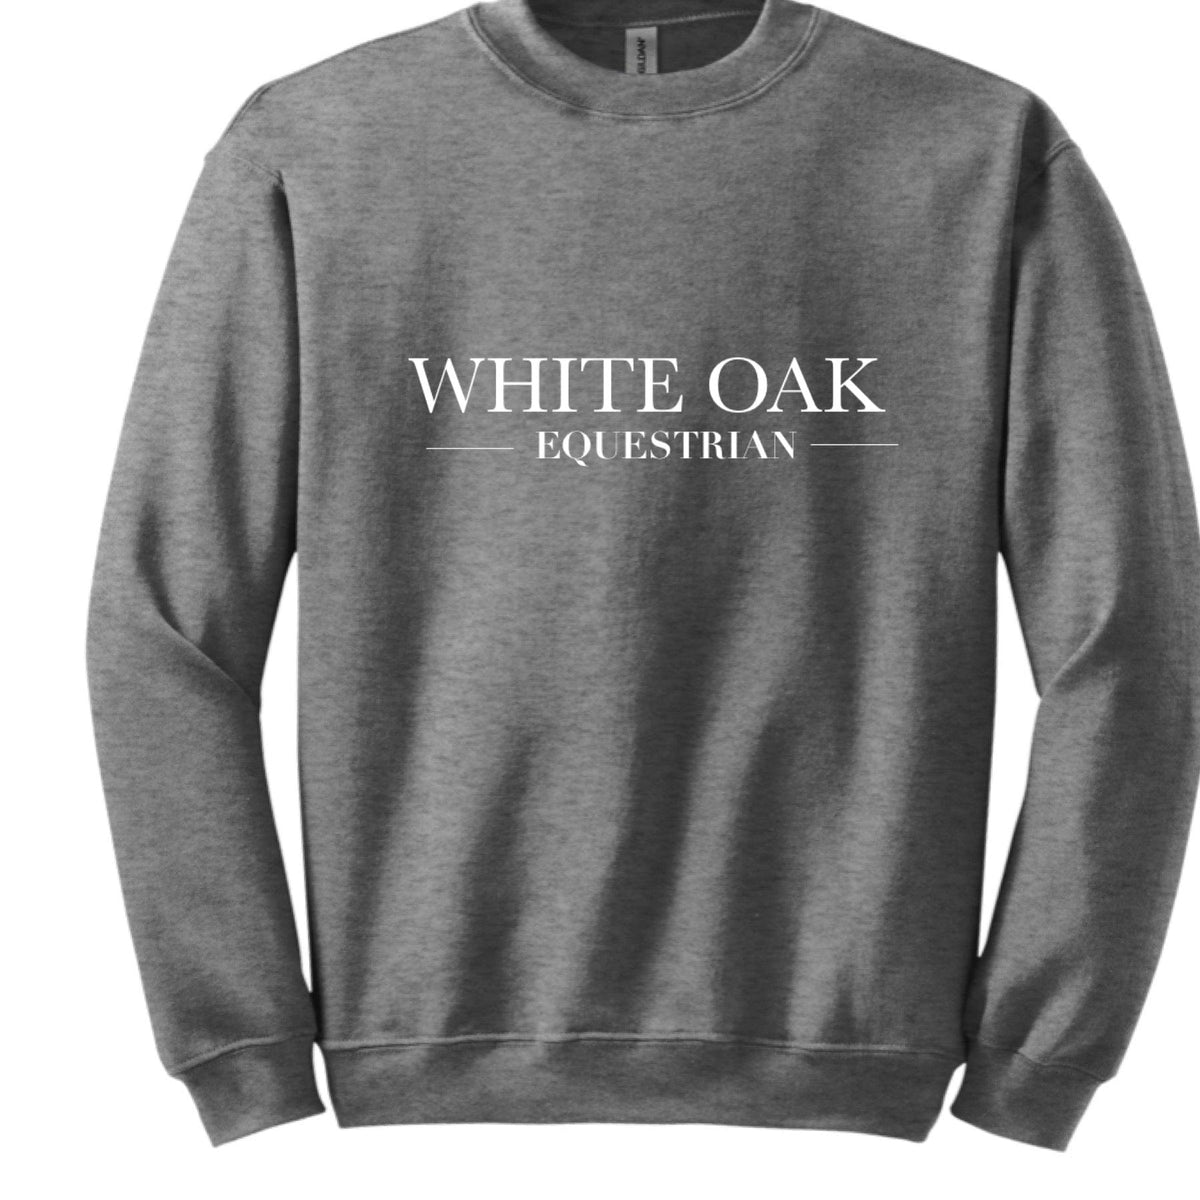 Equestrian Team Apparel White Oak Equestrian Sweatshirt equestrian team apparel online tack store mobile tack store custom farm apparel custom show stable clothing equestrian lifestyle horse show clothing riding clothes horses equestrian tack store